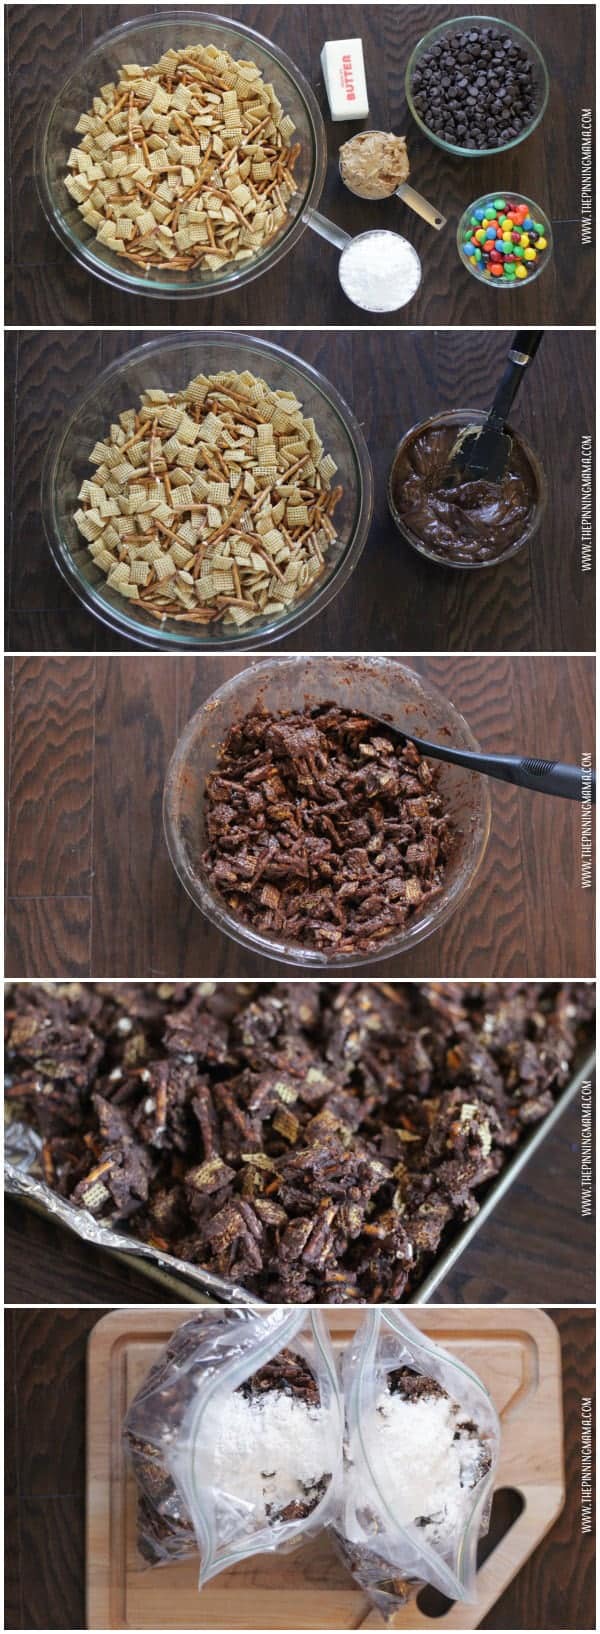 Only a few ingredients in this amazing Chocolate Peanut Butter Chex mix recipe!  Perfect for kids to help!